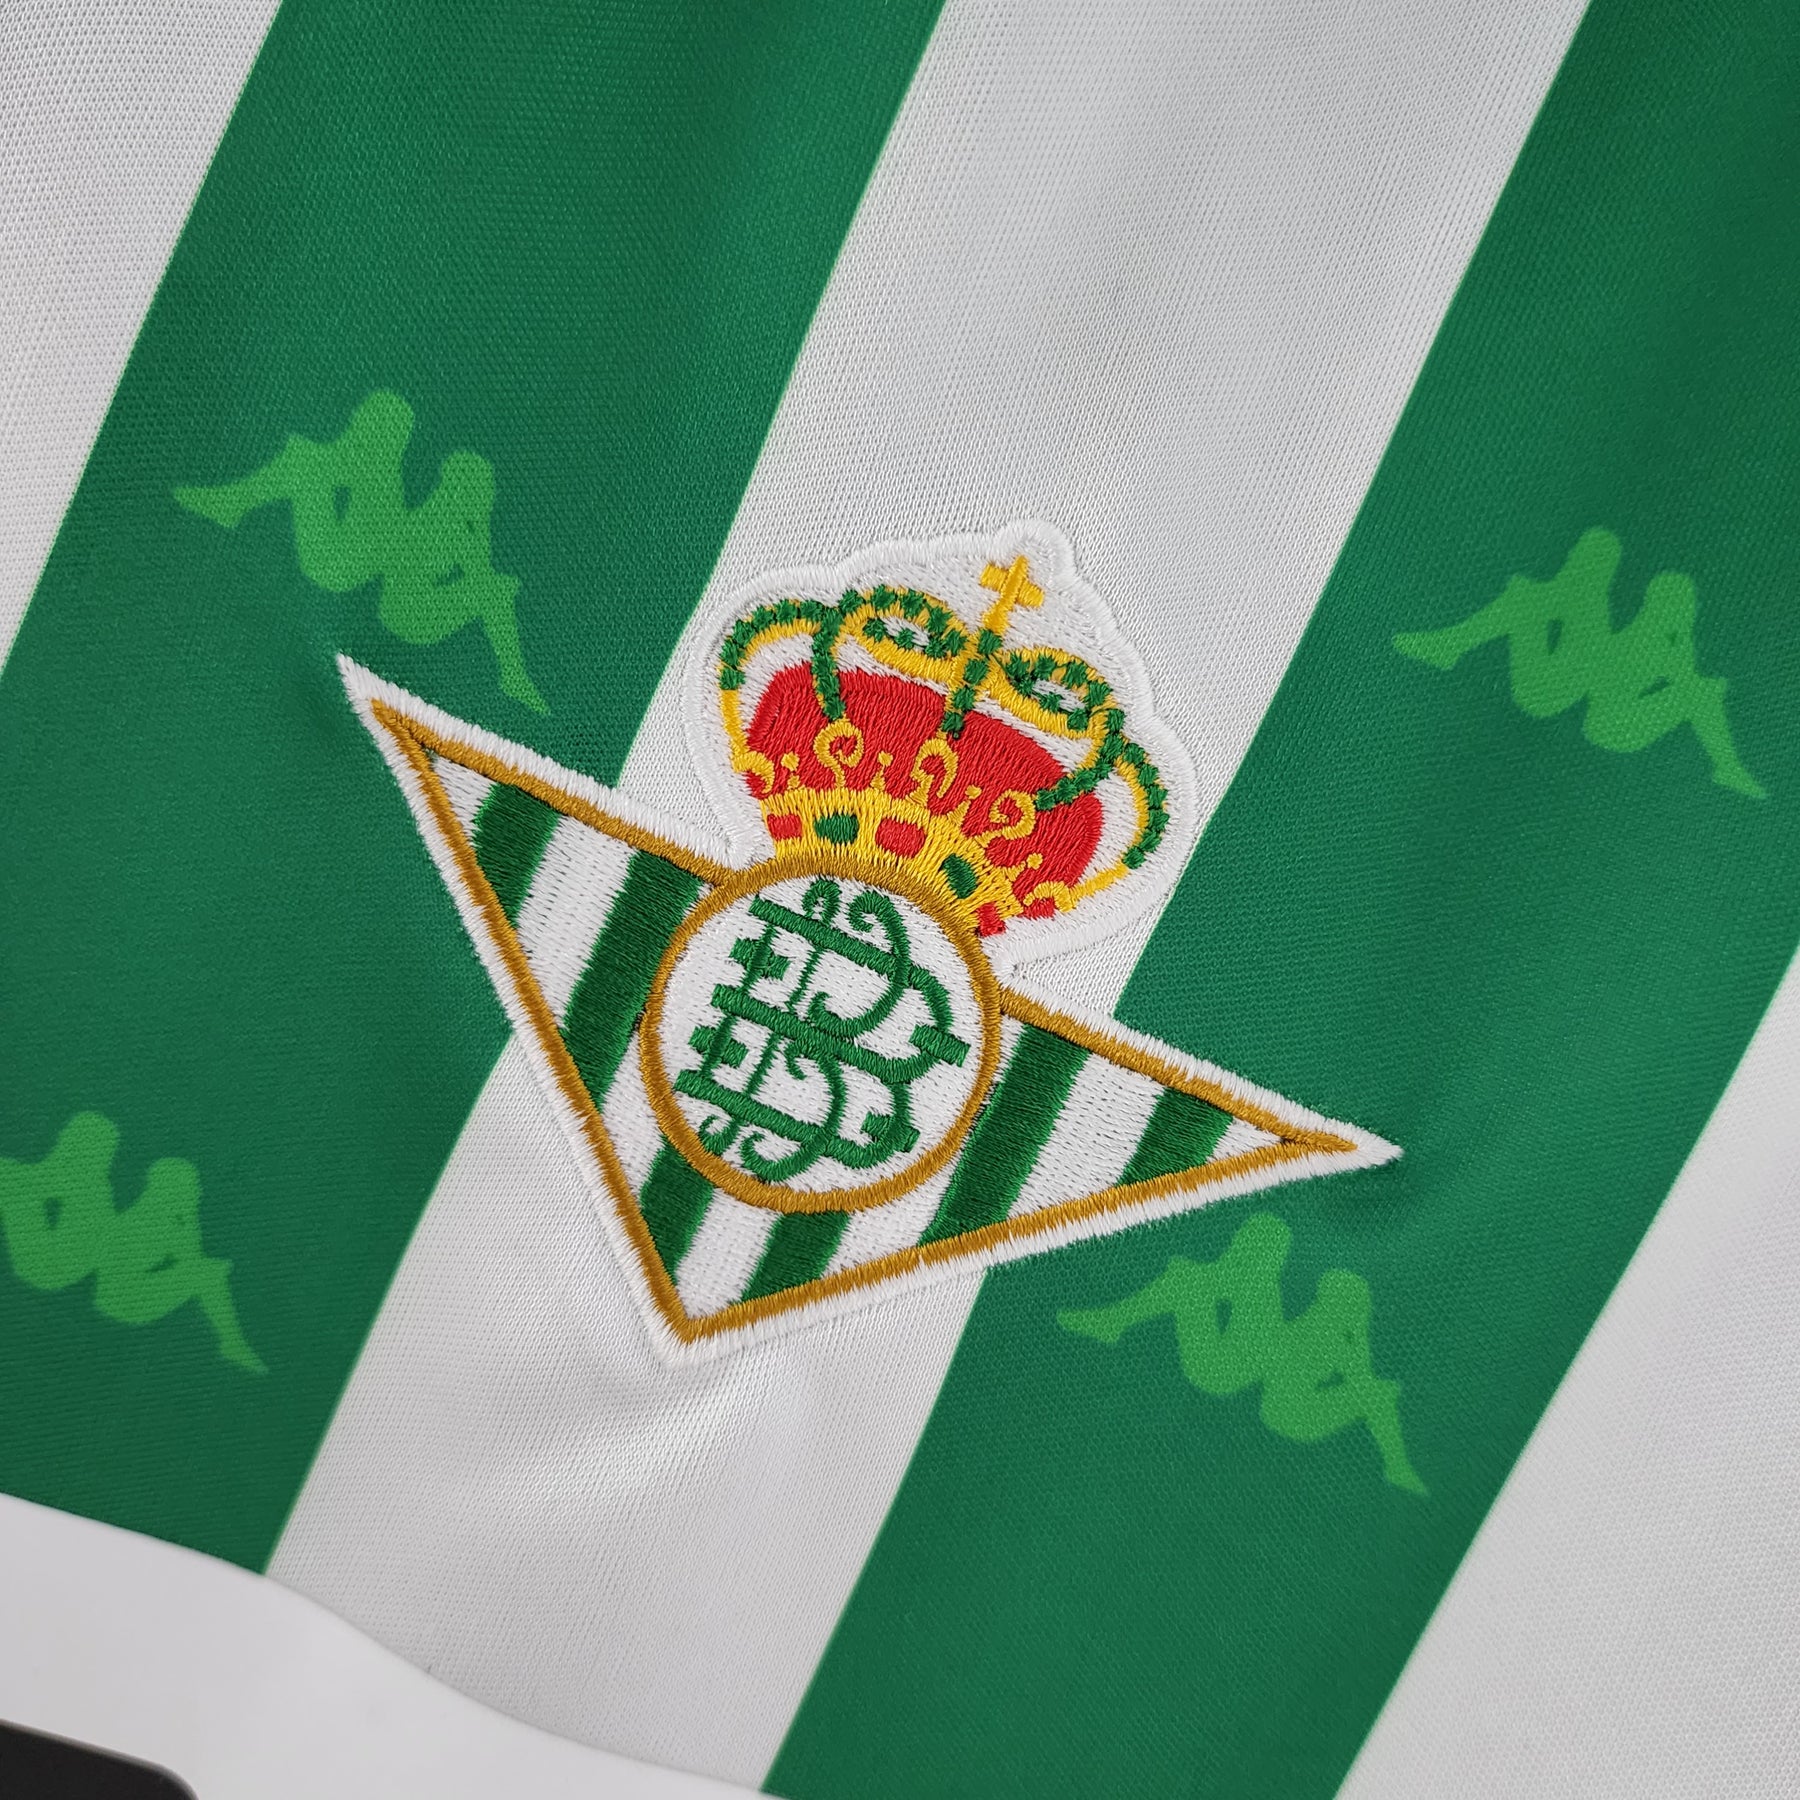 Chandal Real Betis Balompié 1995- 96 M – jappyfootball